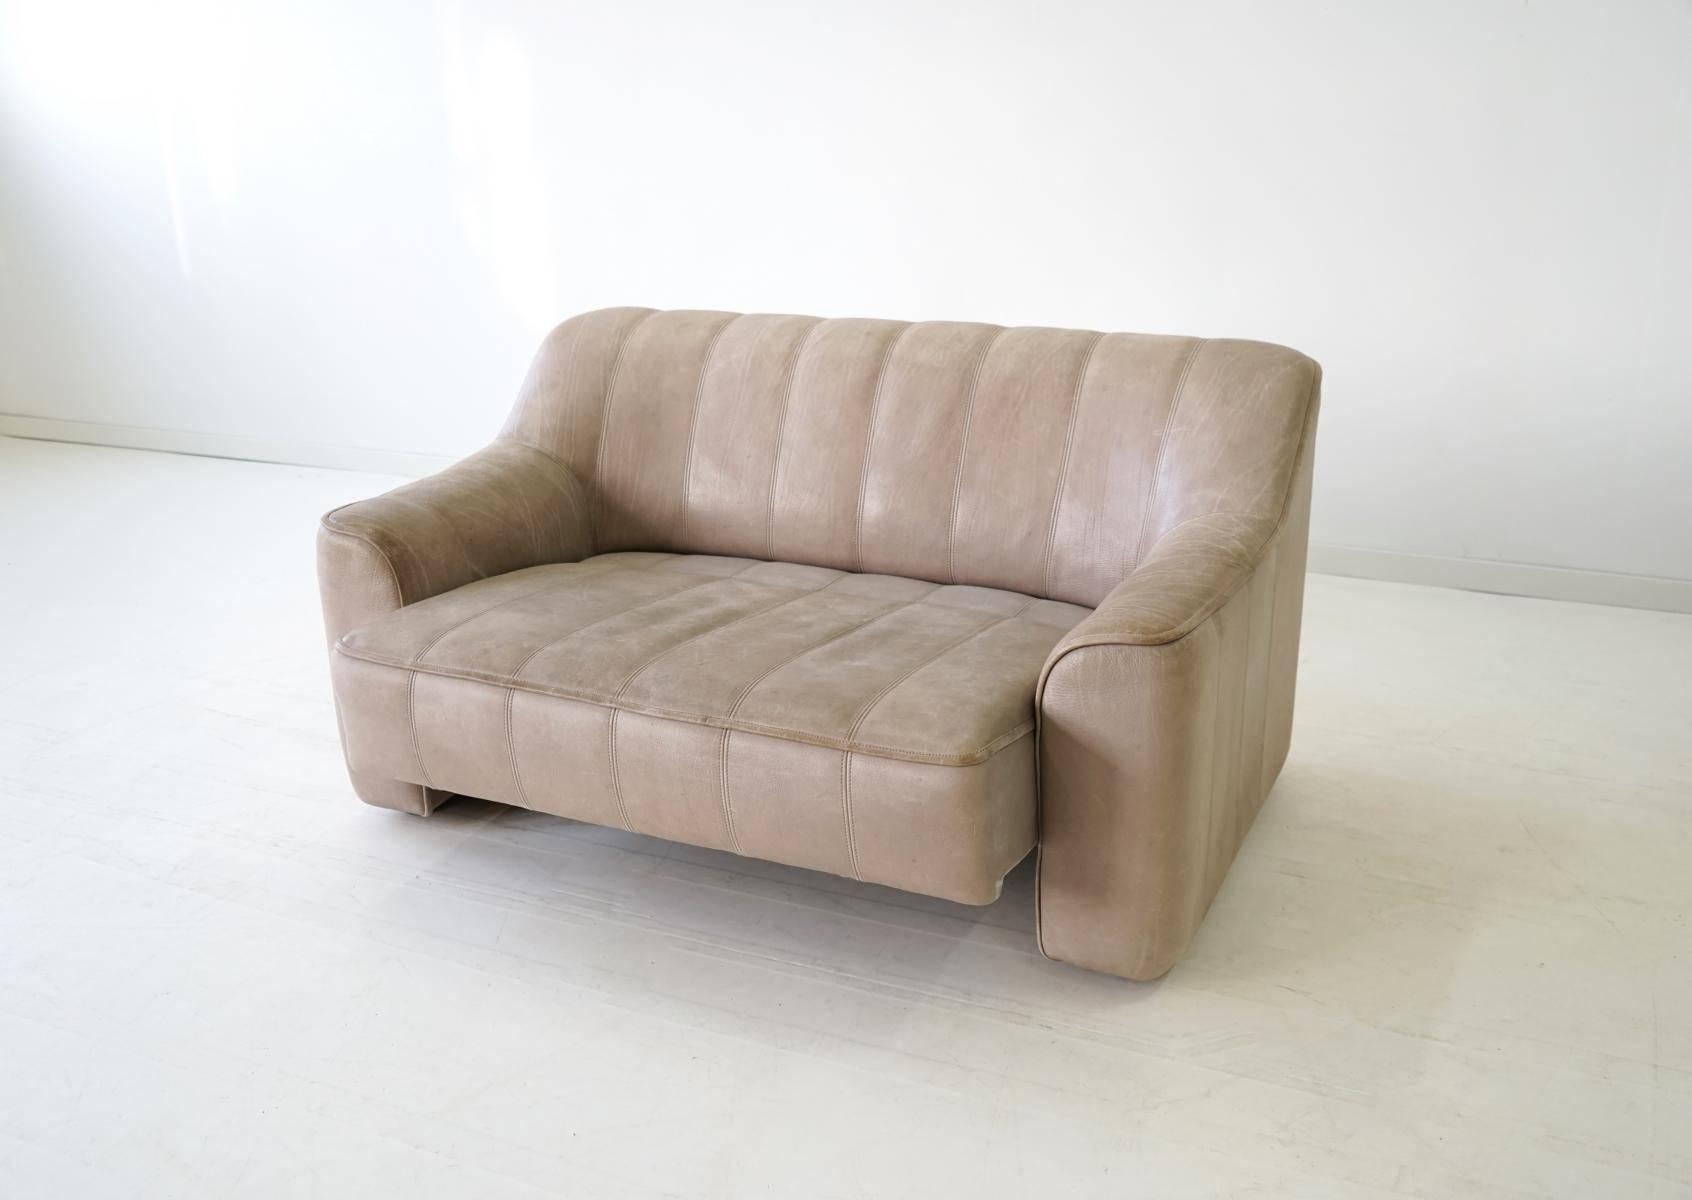 Two-Seat Ds 44 Sofa by De Sede Neck Leather Extendable Seat 1